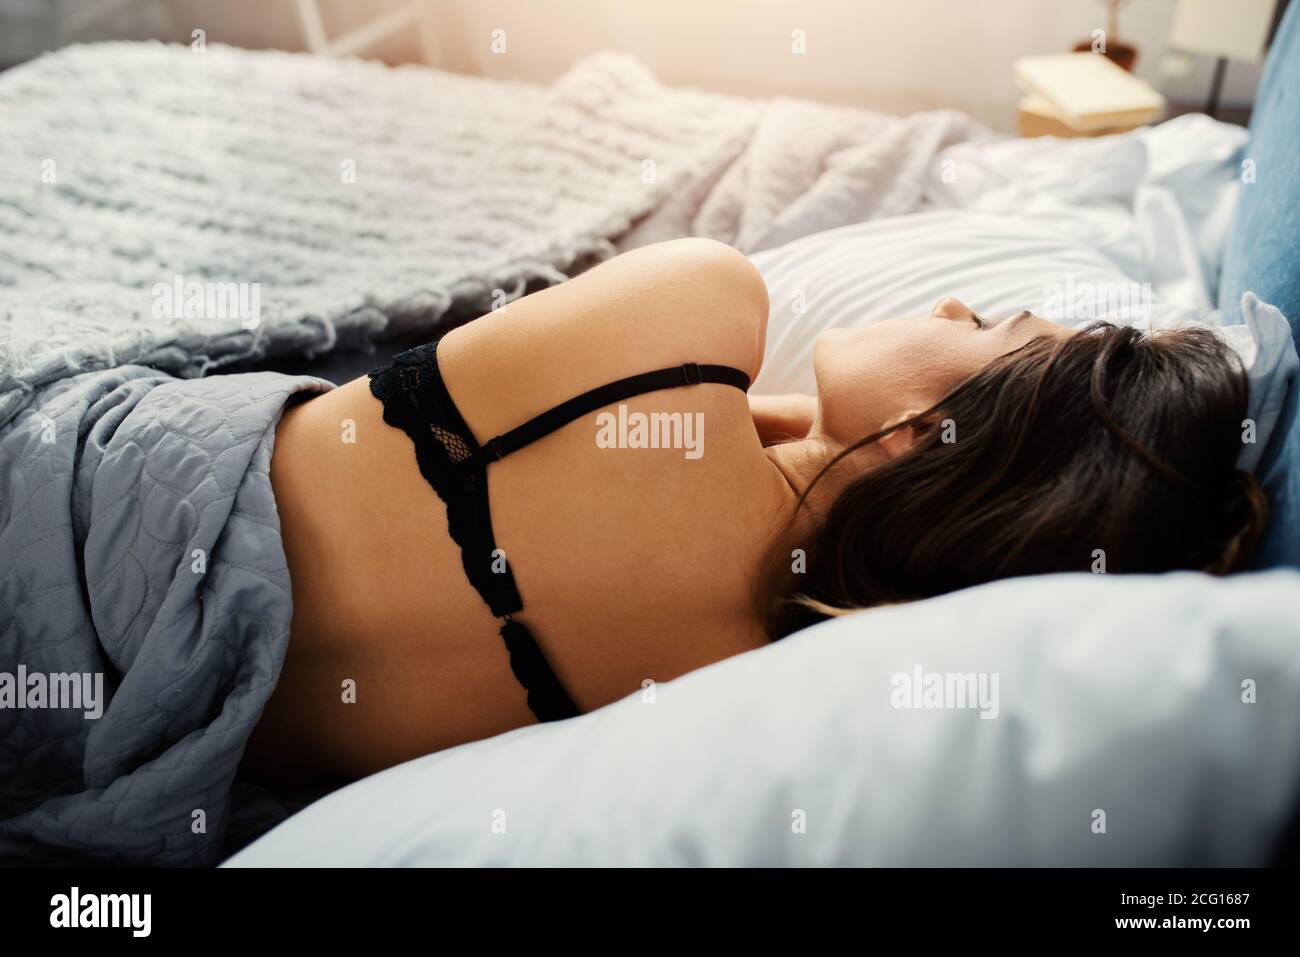 Girl sleeps in a cozy bed during the night. Concept of relax and rest. Stock Photo